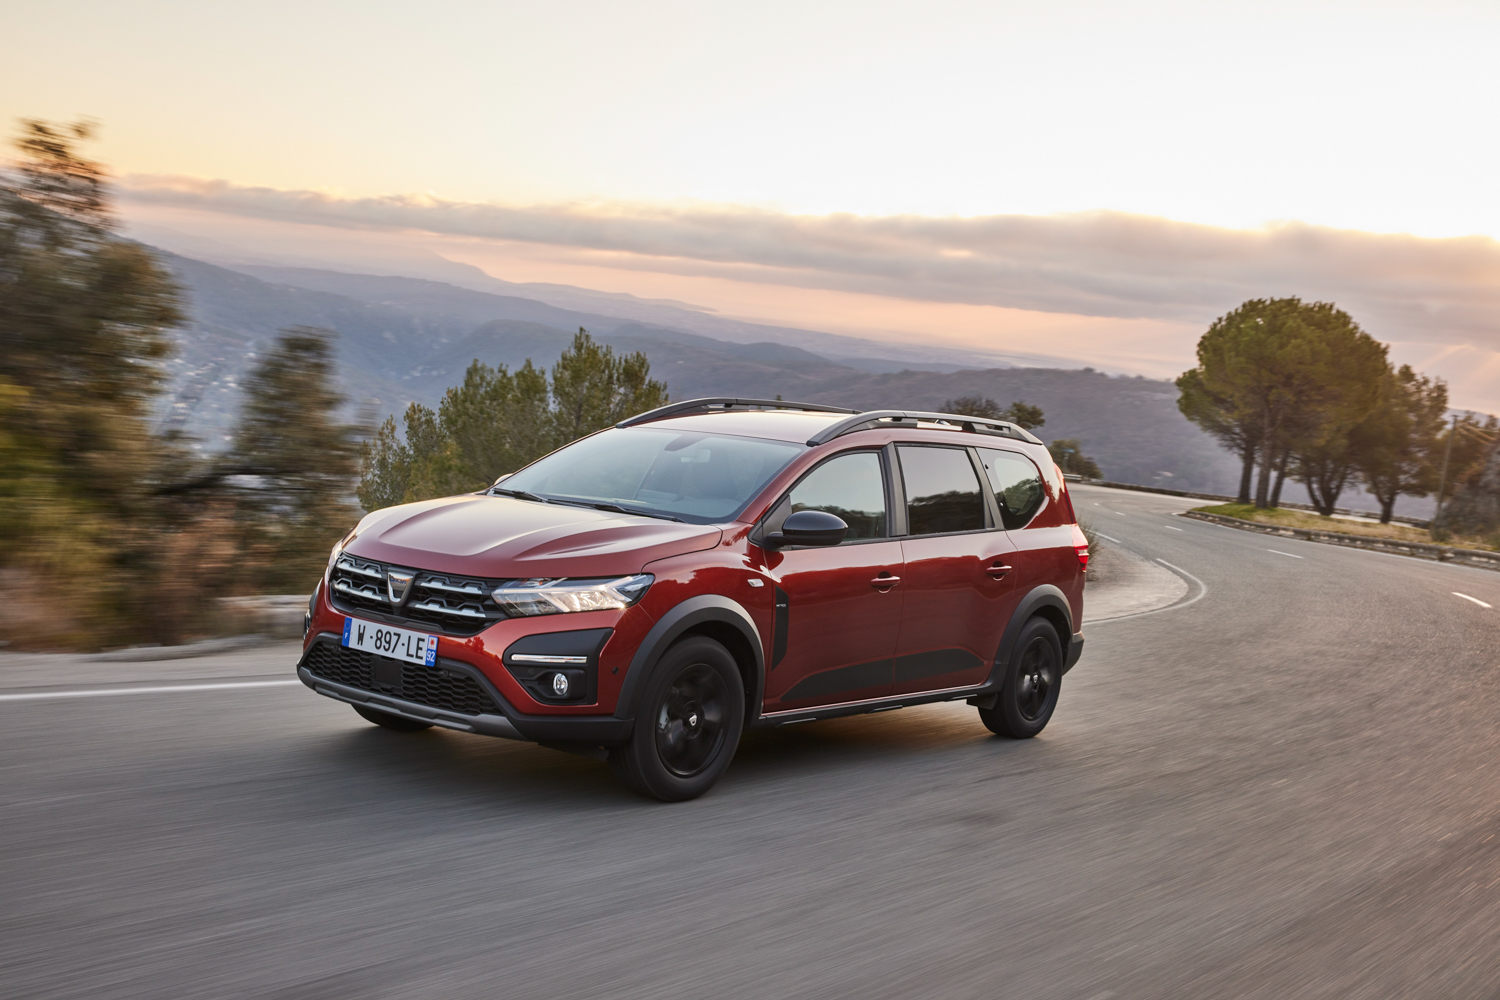 Car News | Strong sales for Renault Group in June